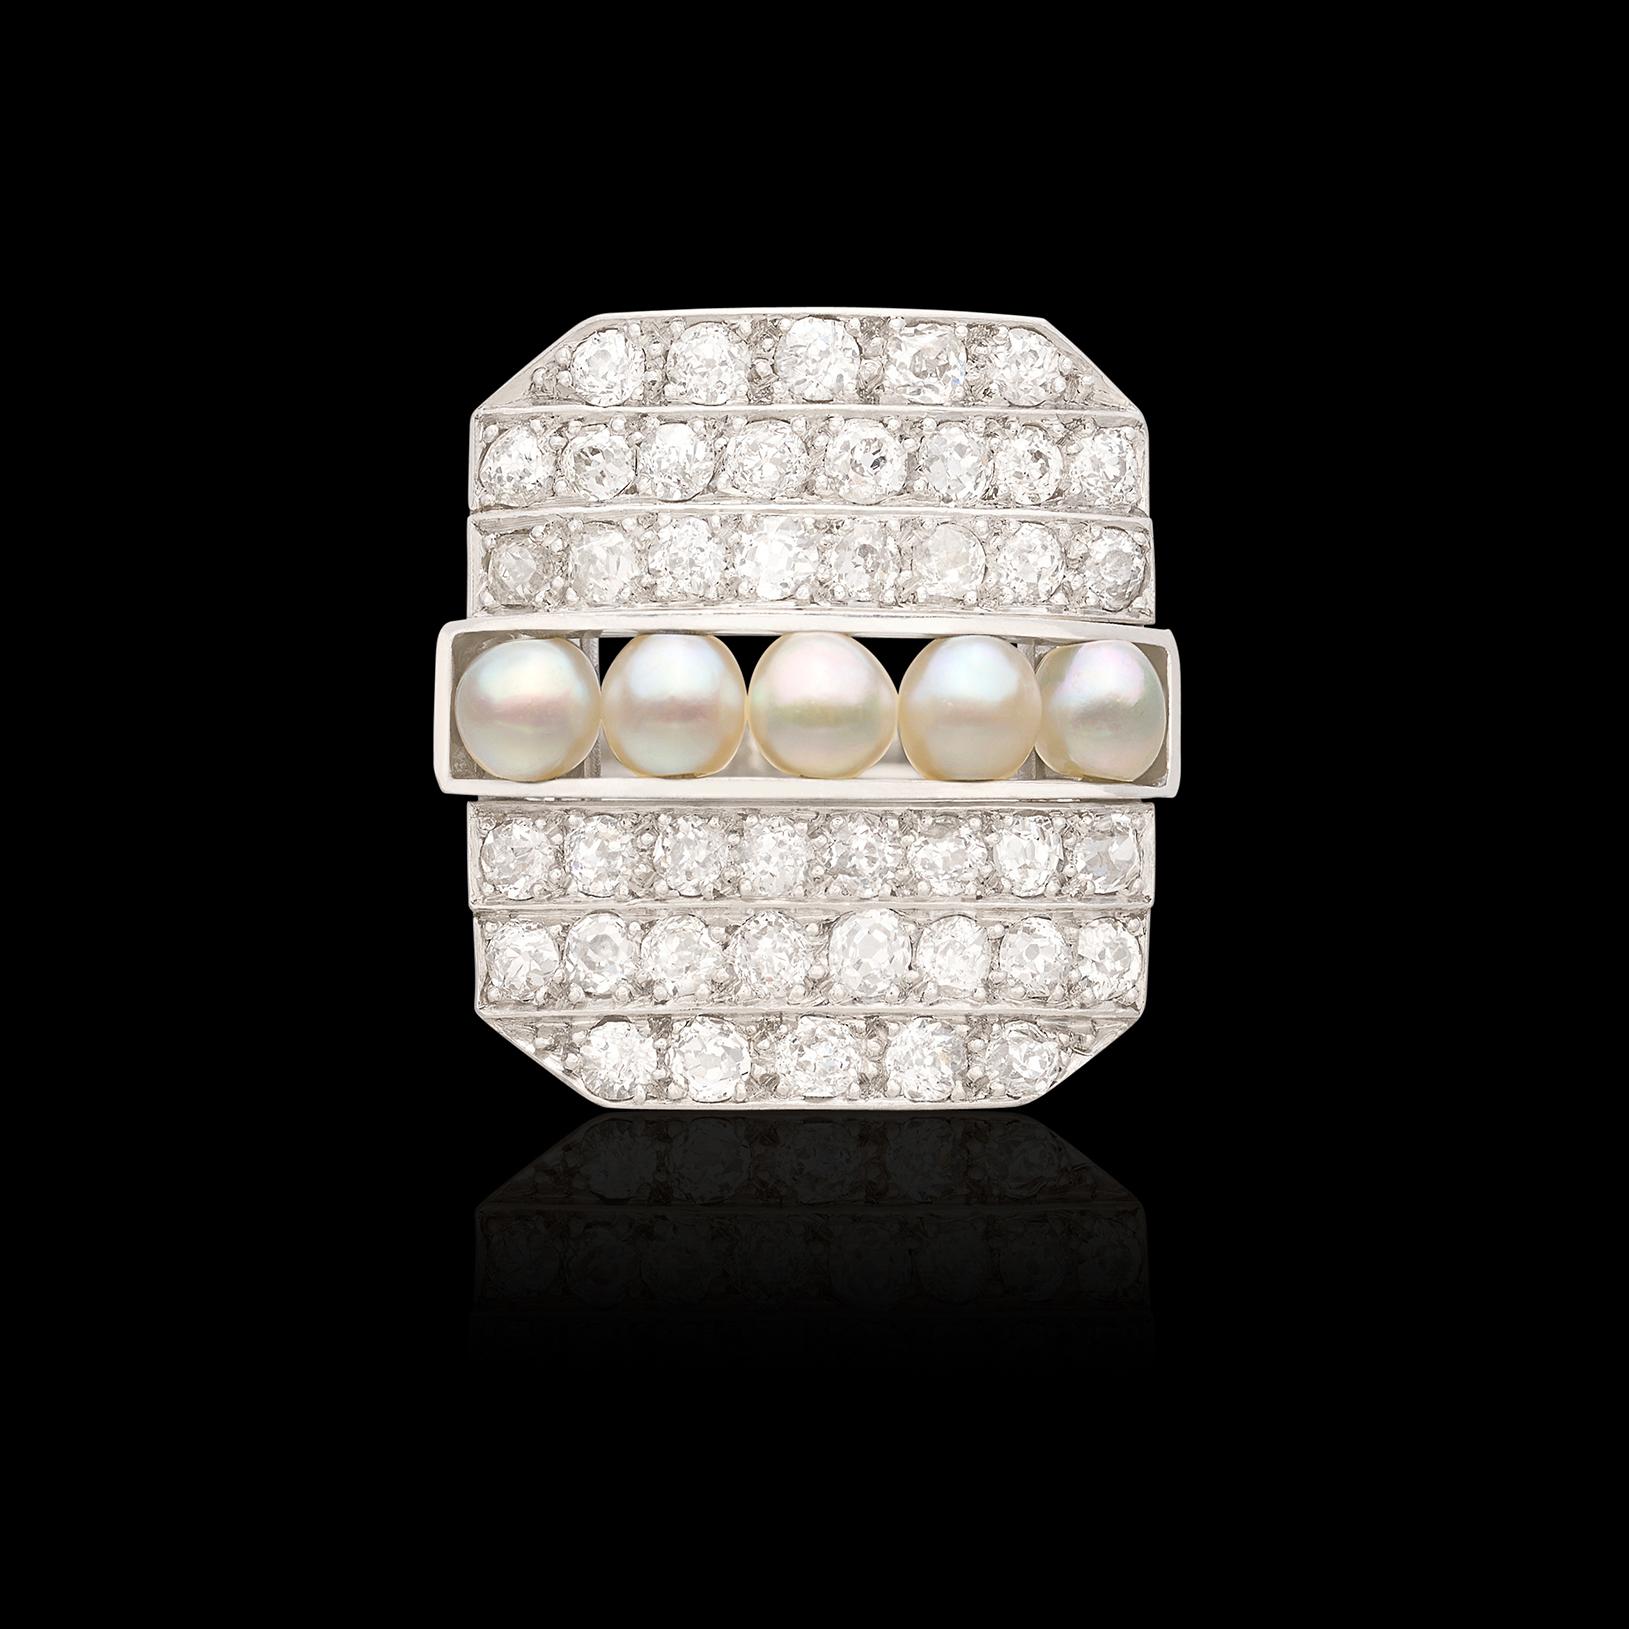 Own a gorgeous piece of history! This antique platinum ring features 42 exceptional Old European Cut diamonds perfectly set in the face of the ring with 5 perfectly matched pearls set in the middle of the ring. The antique cocktail ring circa late